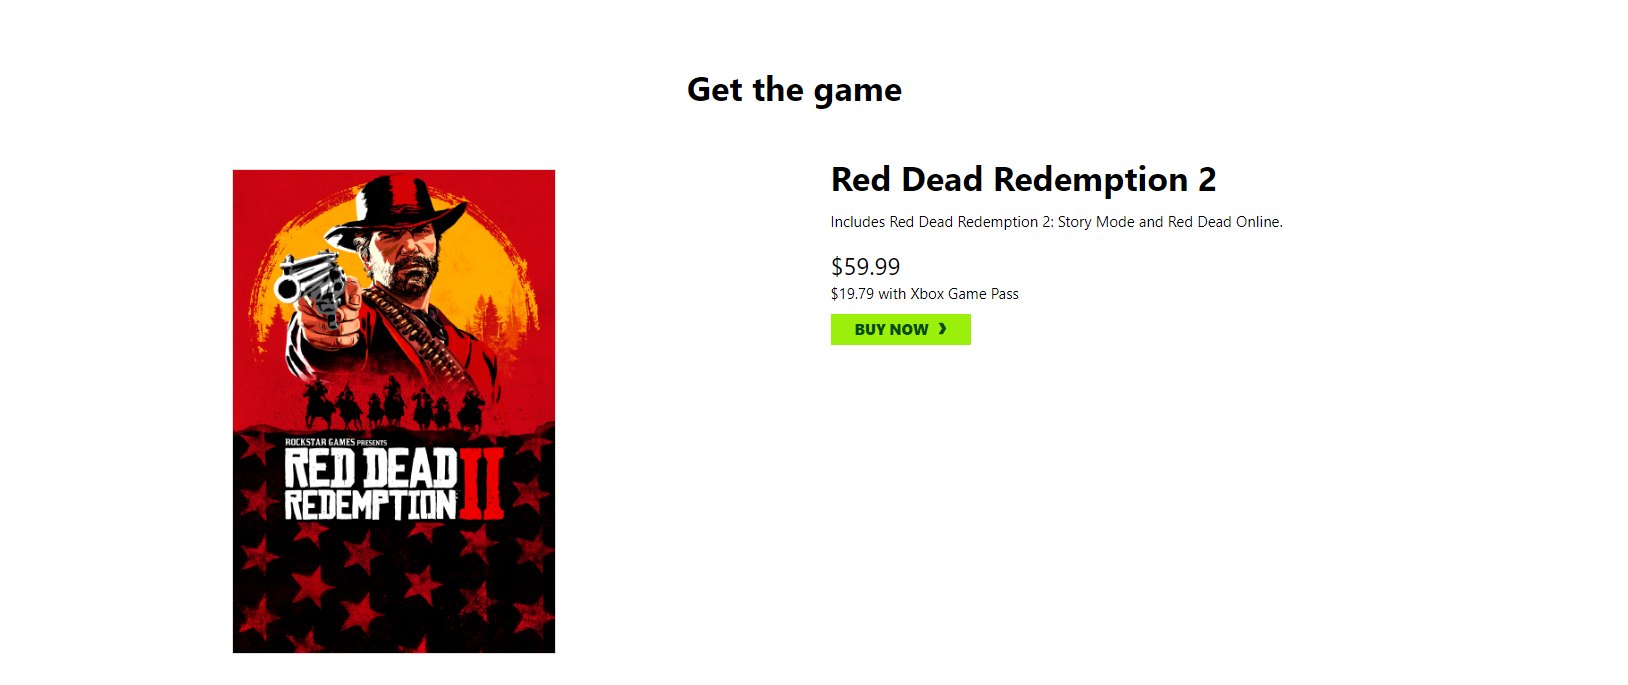 Red Dead Redemption 2 on the Xbox Store